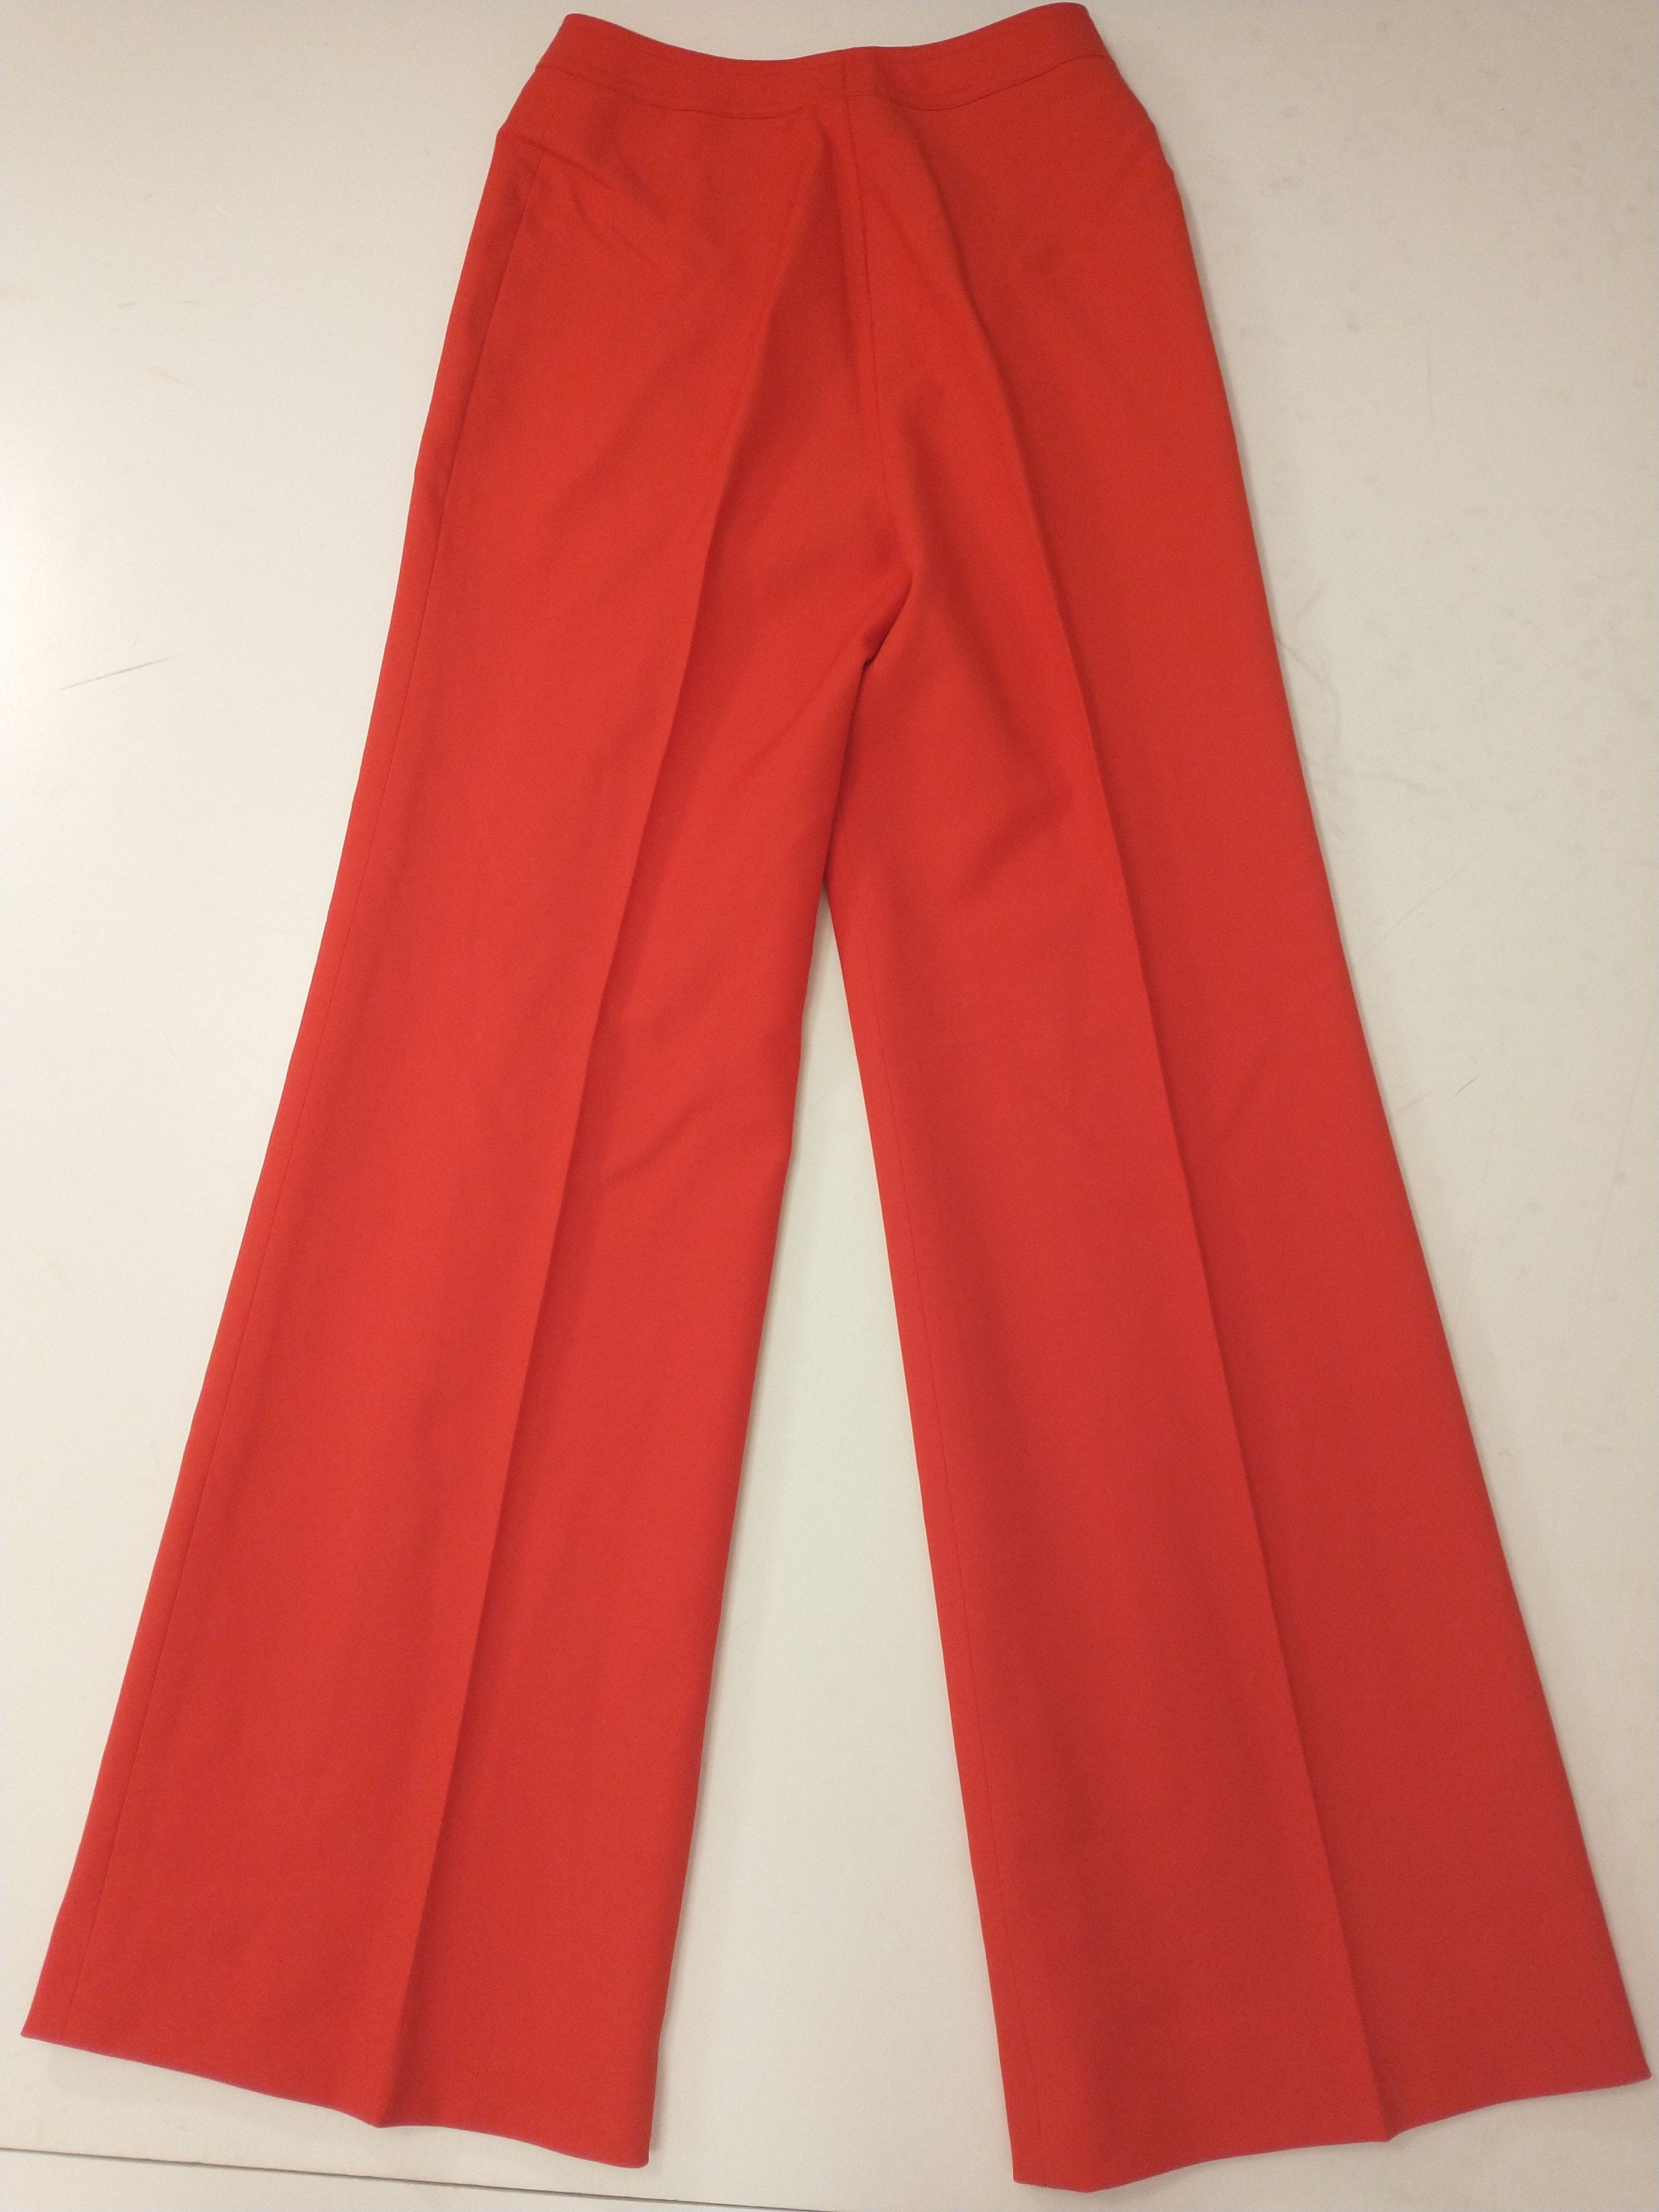 Casual Vintage Flare Pants For Women Solid Color Disco Dance 70's Bell  Bottom Hippie Pants